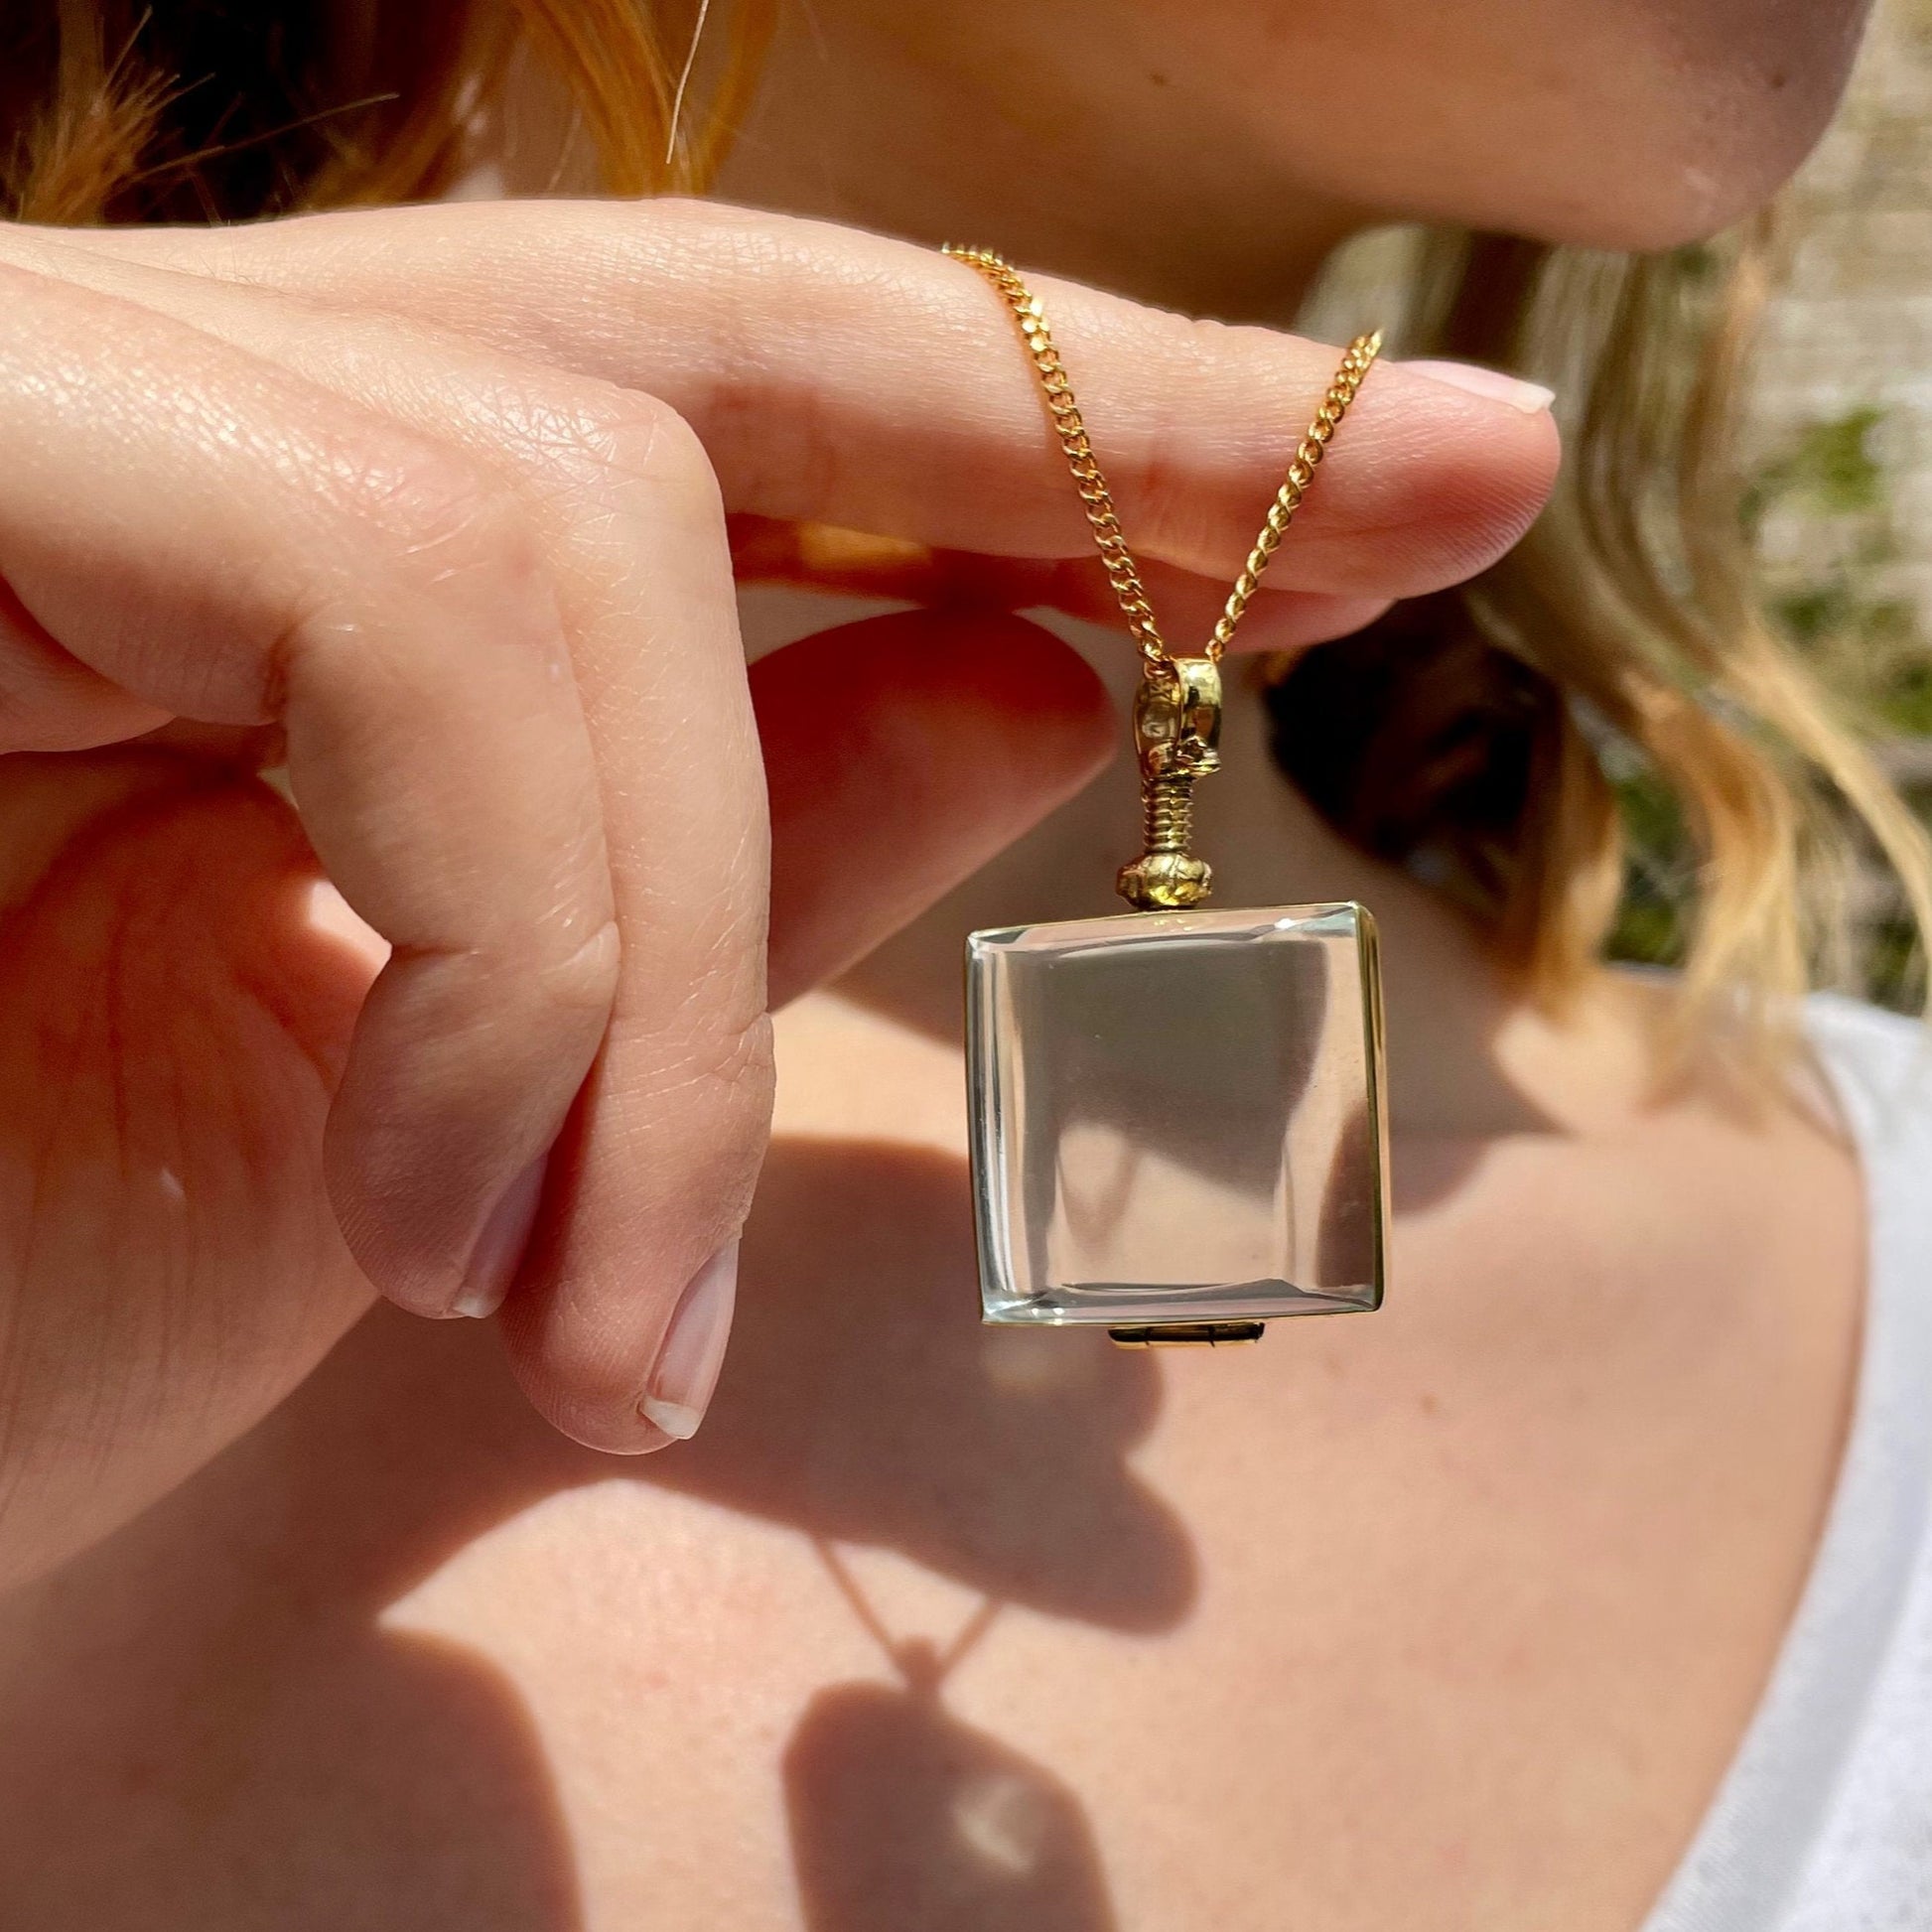 Square Shaped Gold Locket for Hair, Glass Locket for Photo Locket, Gold Plated Locket, Statement Locket, Glass Locket Pendant for Necklace